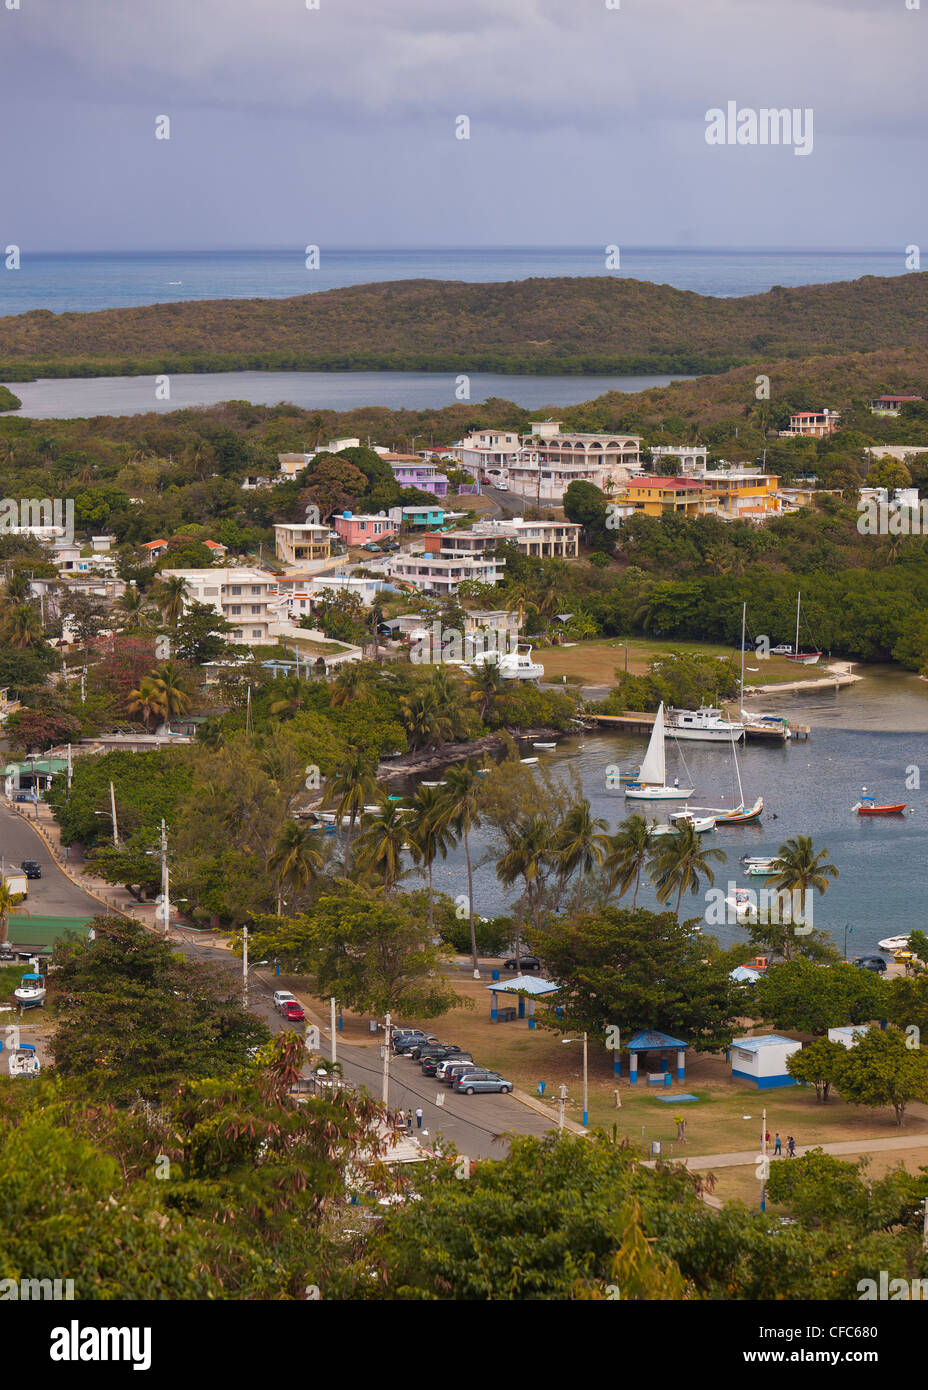 LAS CROABAS, PUERTO RICO - Harbor and local housing on coast with the Big Lagoon in the distance. Stock Photo